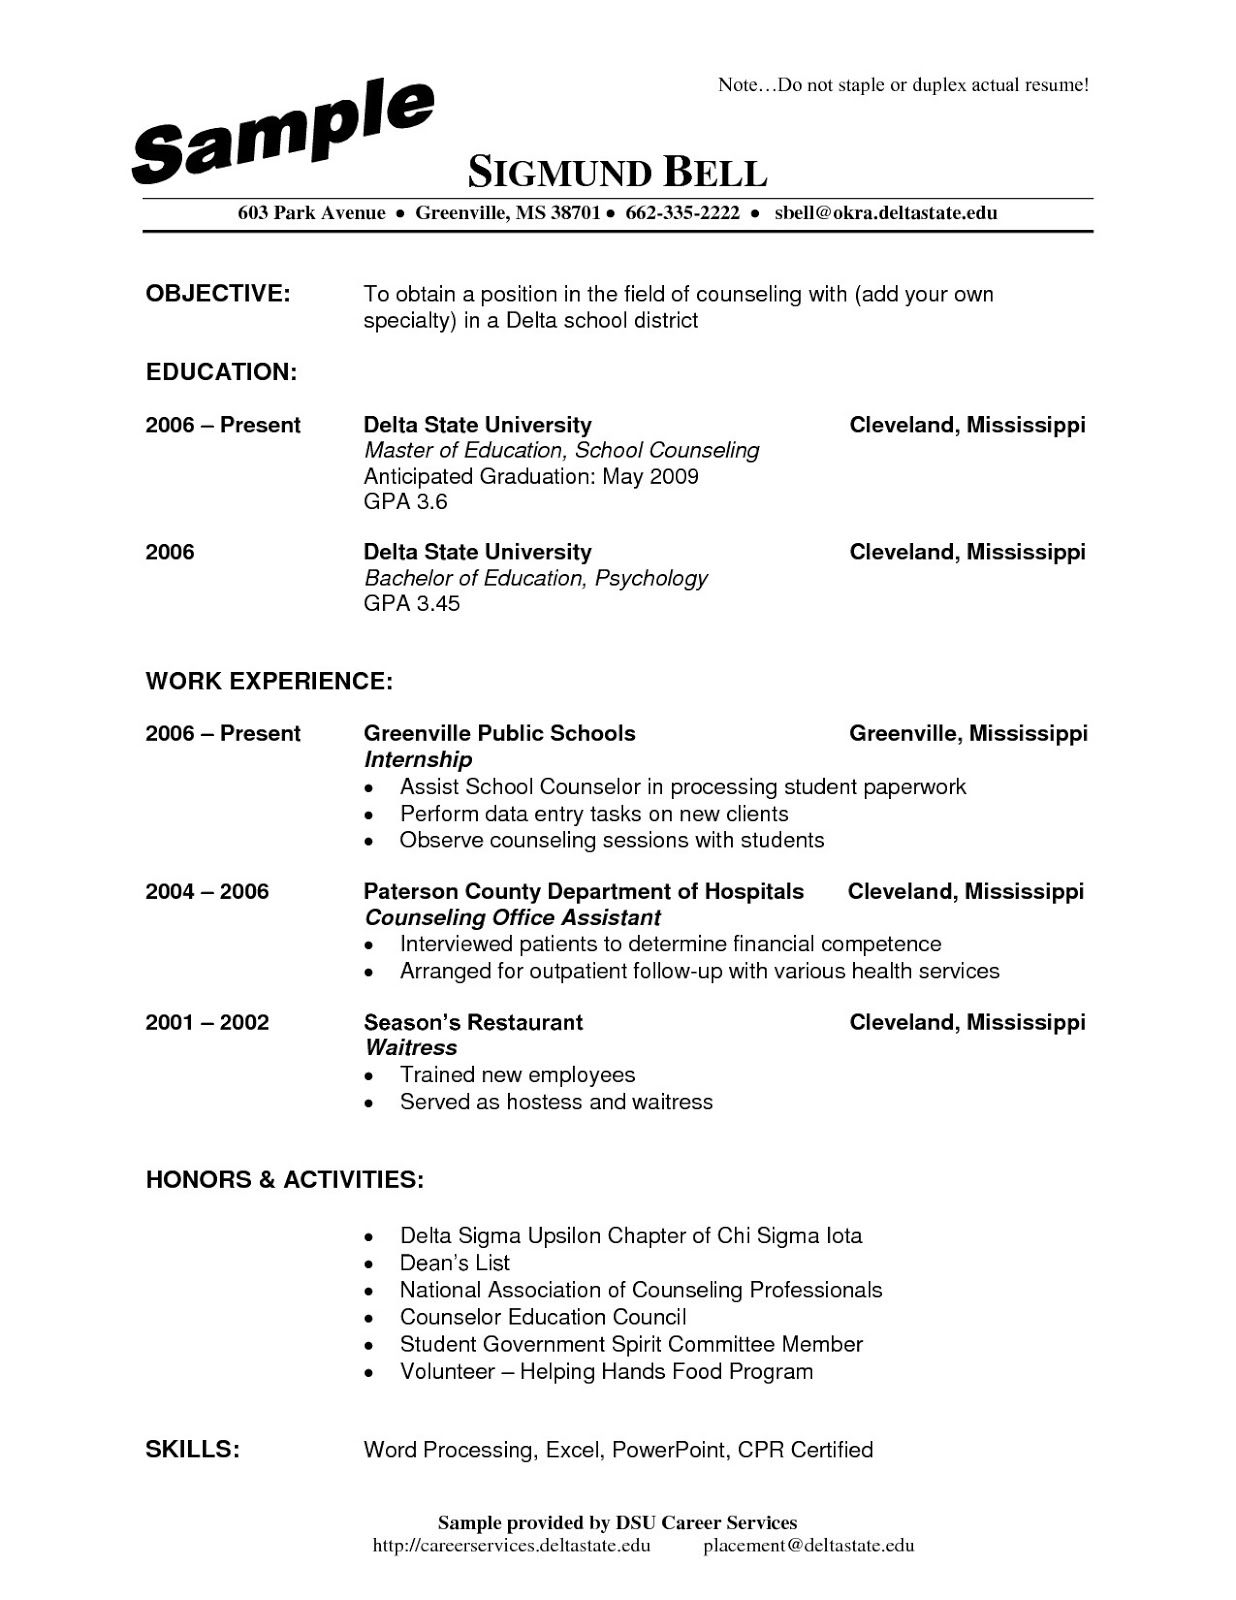 School Counselor Resume Sample 2019 Cv Examples 2020 within sizing 1236 X 1600